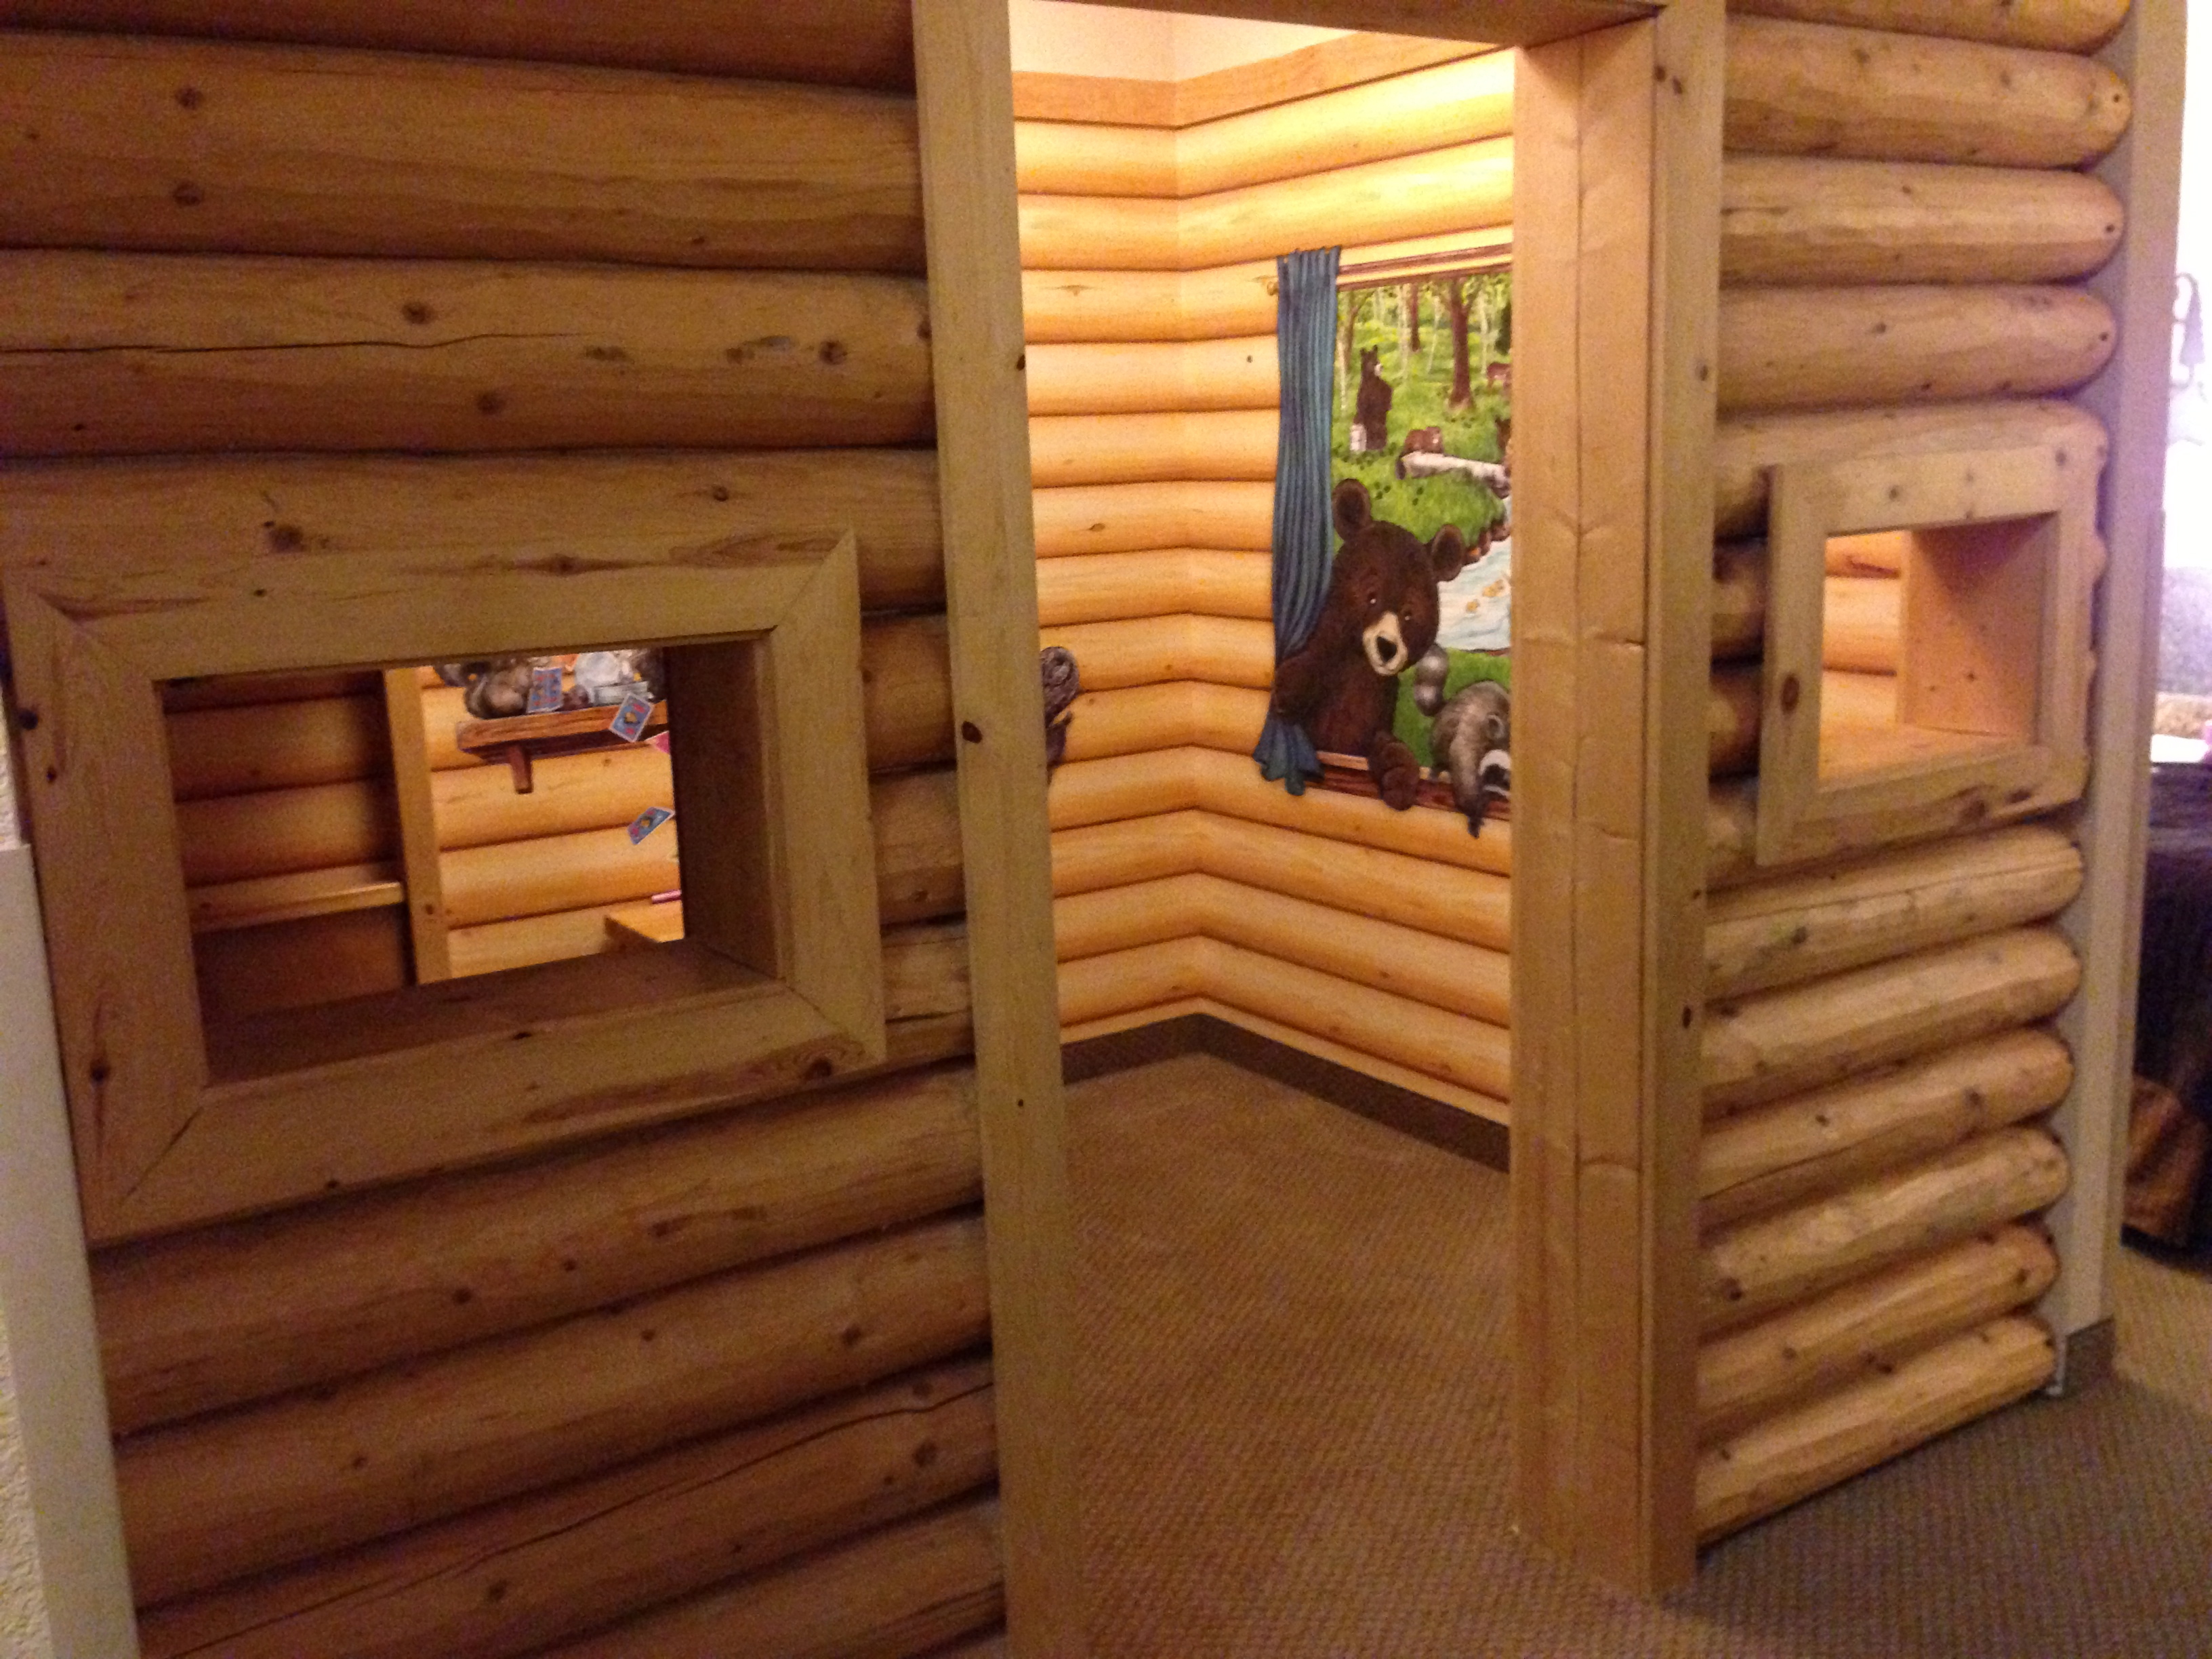 great wolf lodge rooms kids